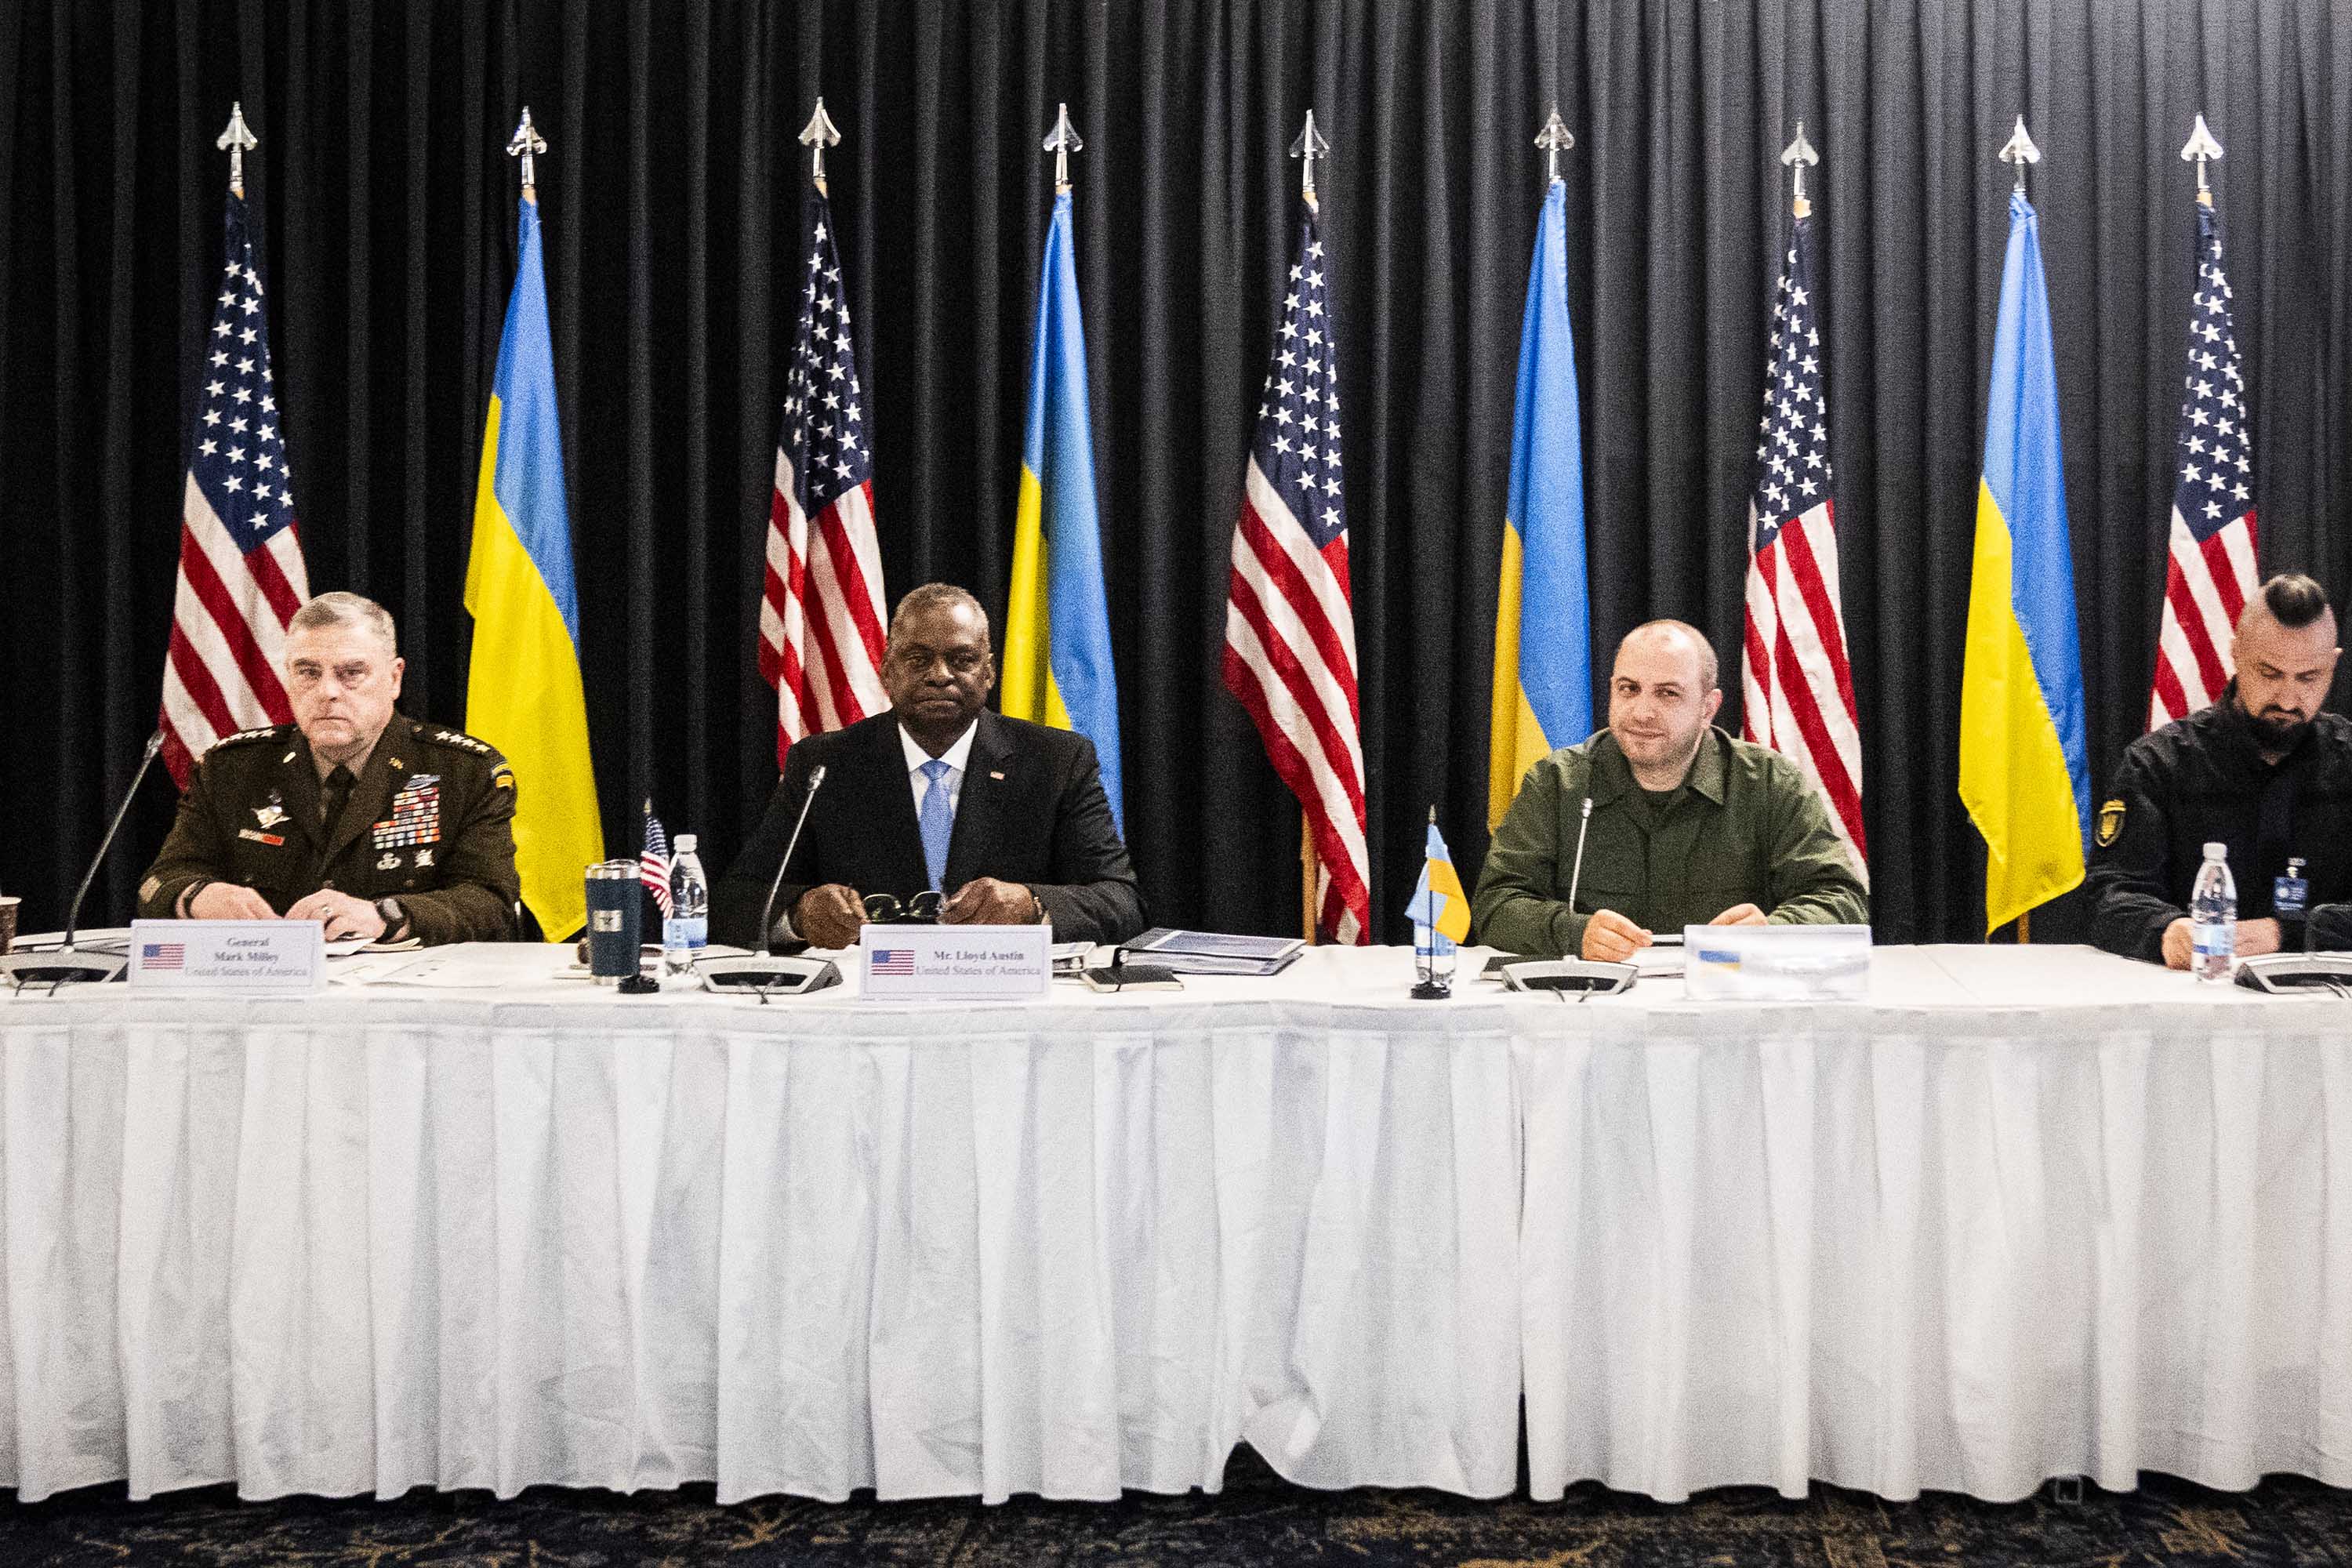 Chairman of the Joint Chiefs of Staff of the United States Army US General Mark Milley, US Secretary of Defence Lloyd Austin, and Ukraine's Defence Minister Rustem Umerov arrive for talks at Ramstein Air Base in Germany, on September 19.